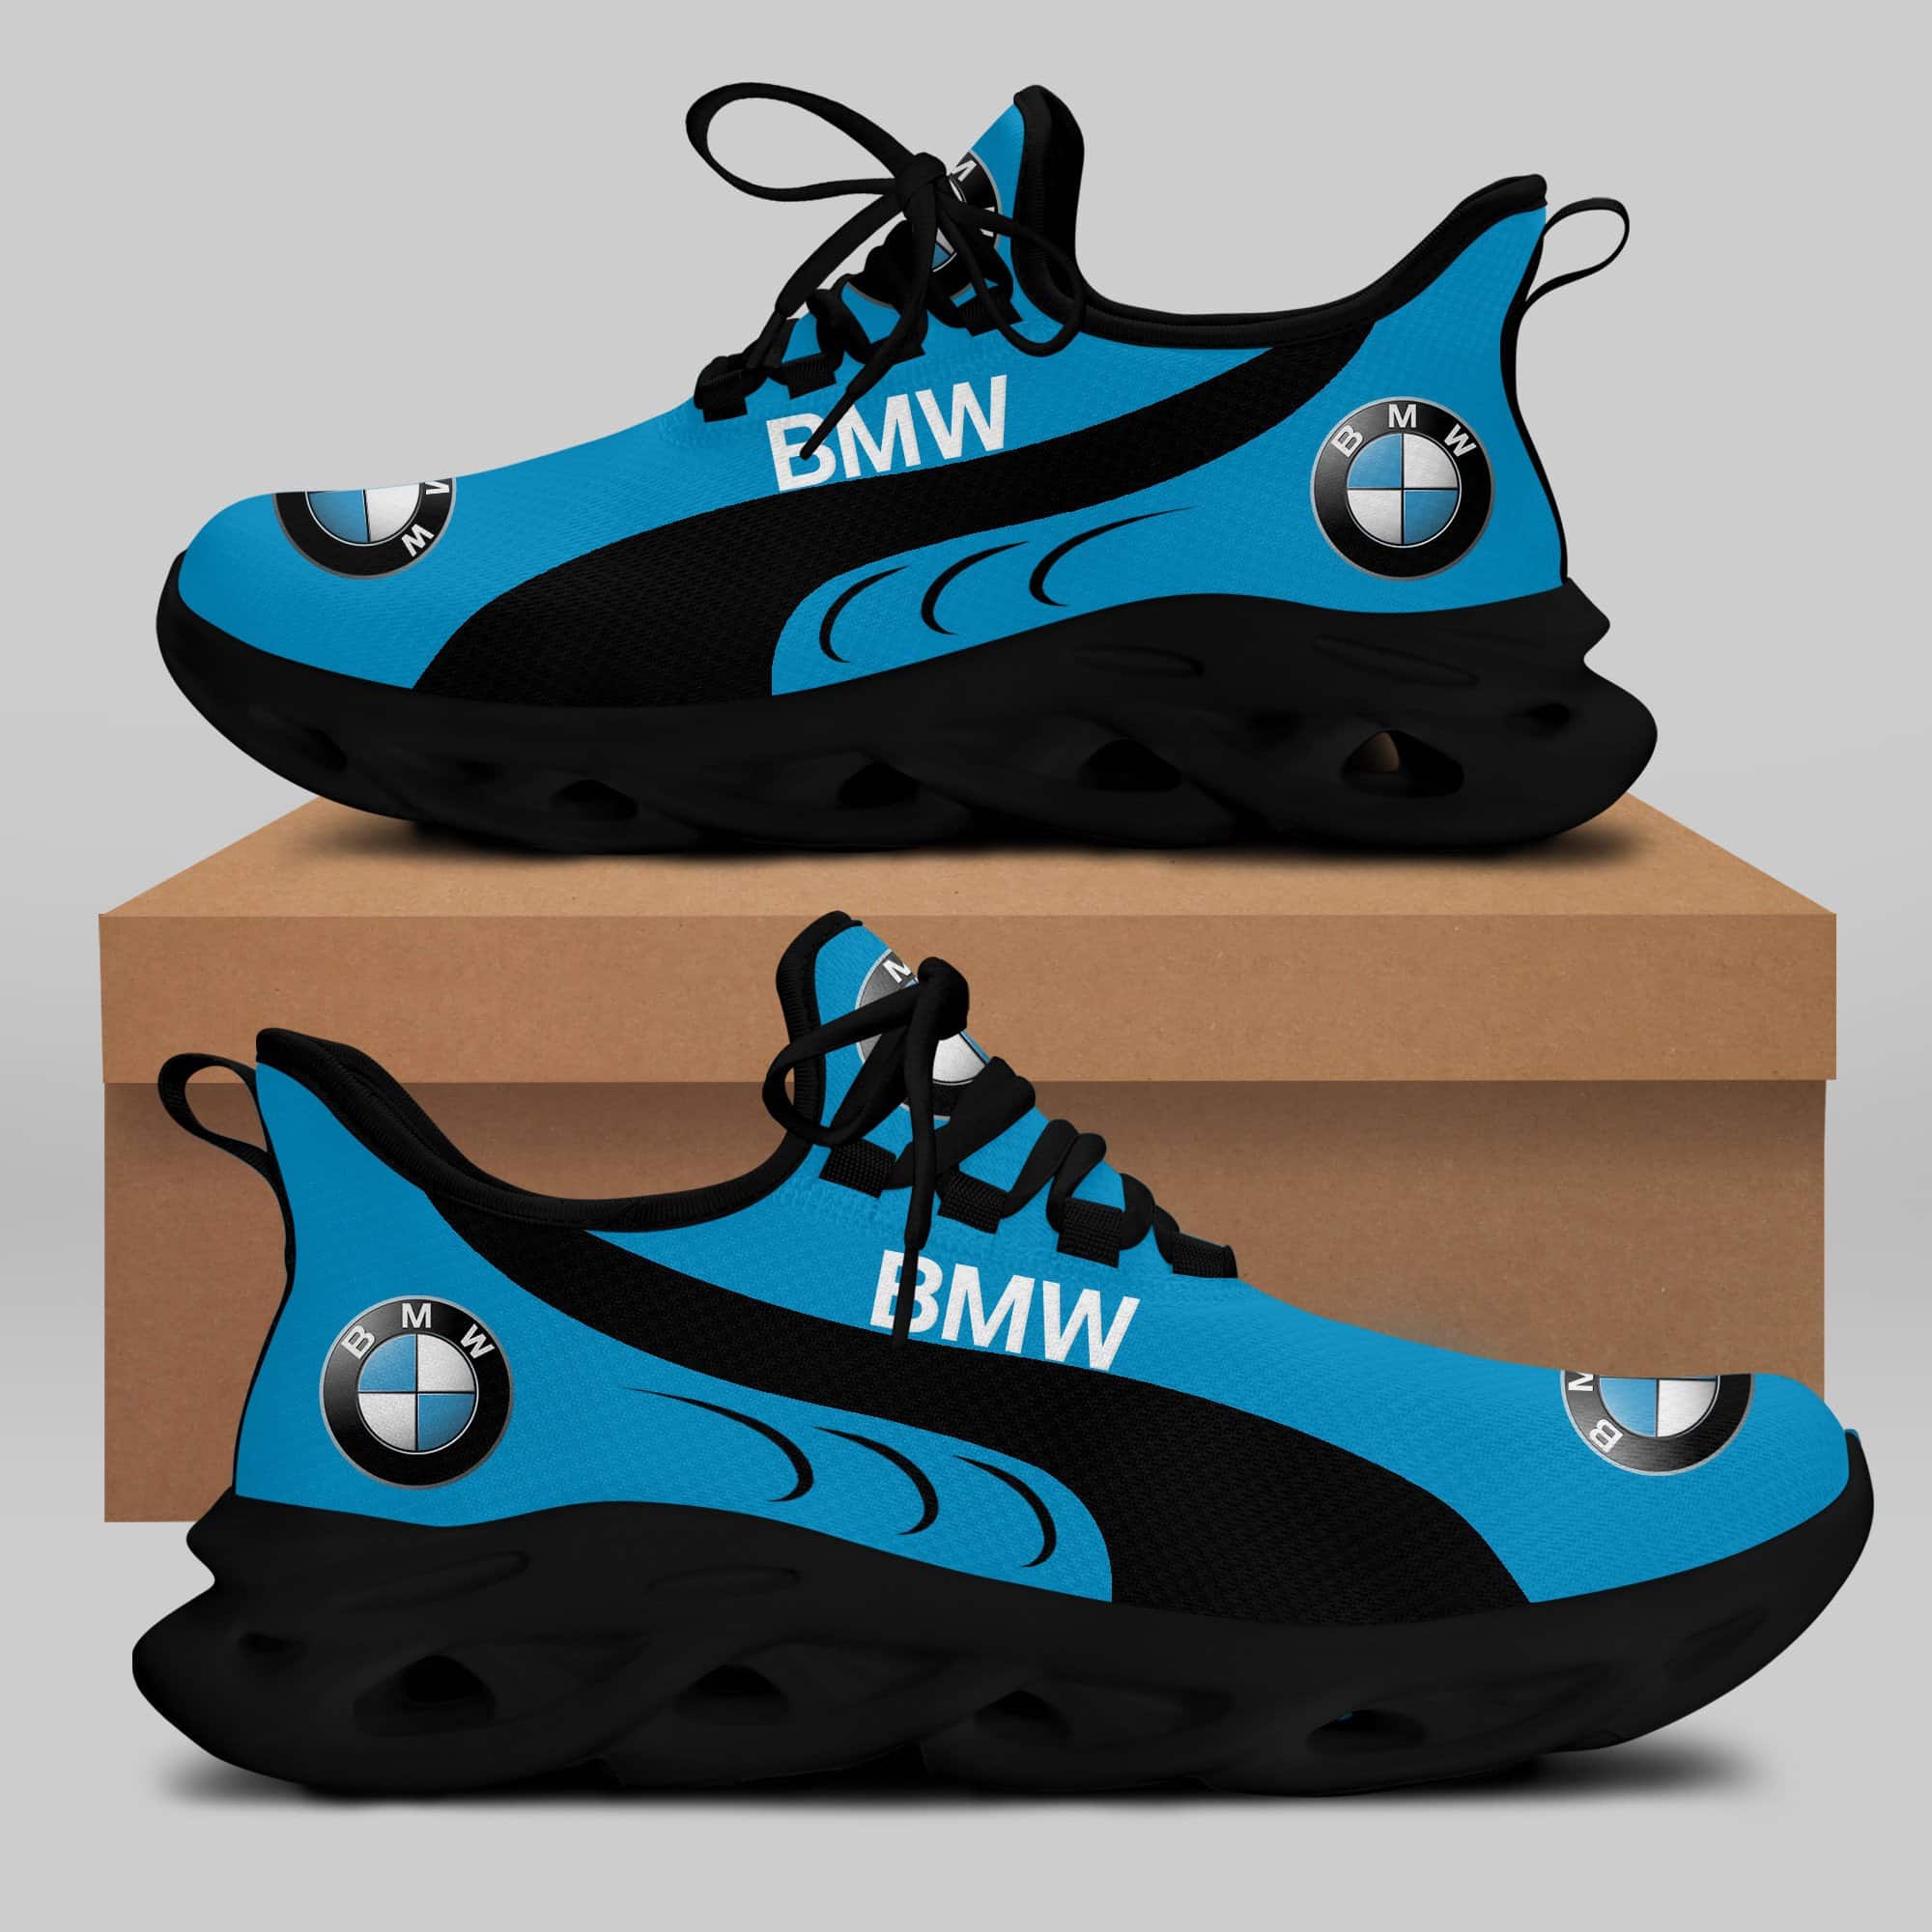 Bmw Running Shoes Max Soul Shoes Sneakers Ver 52 1